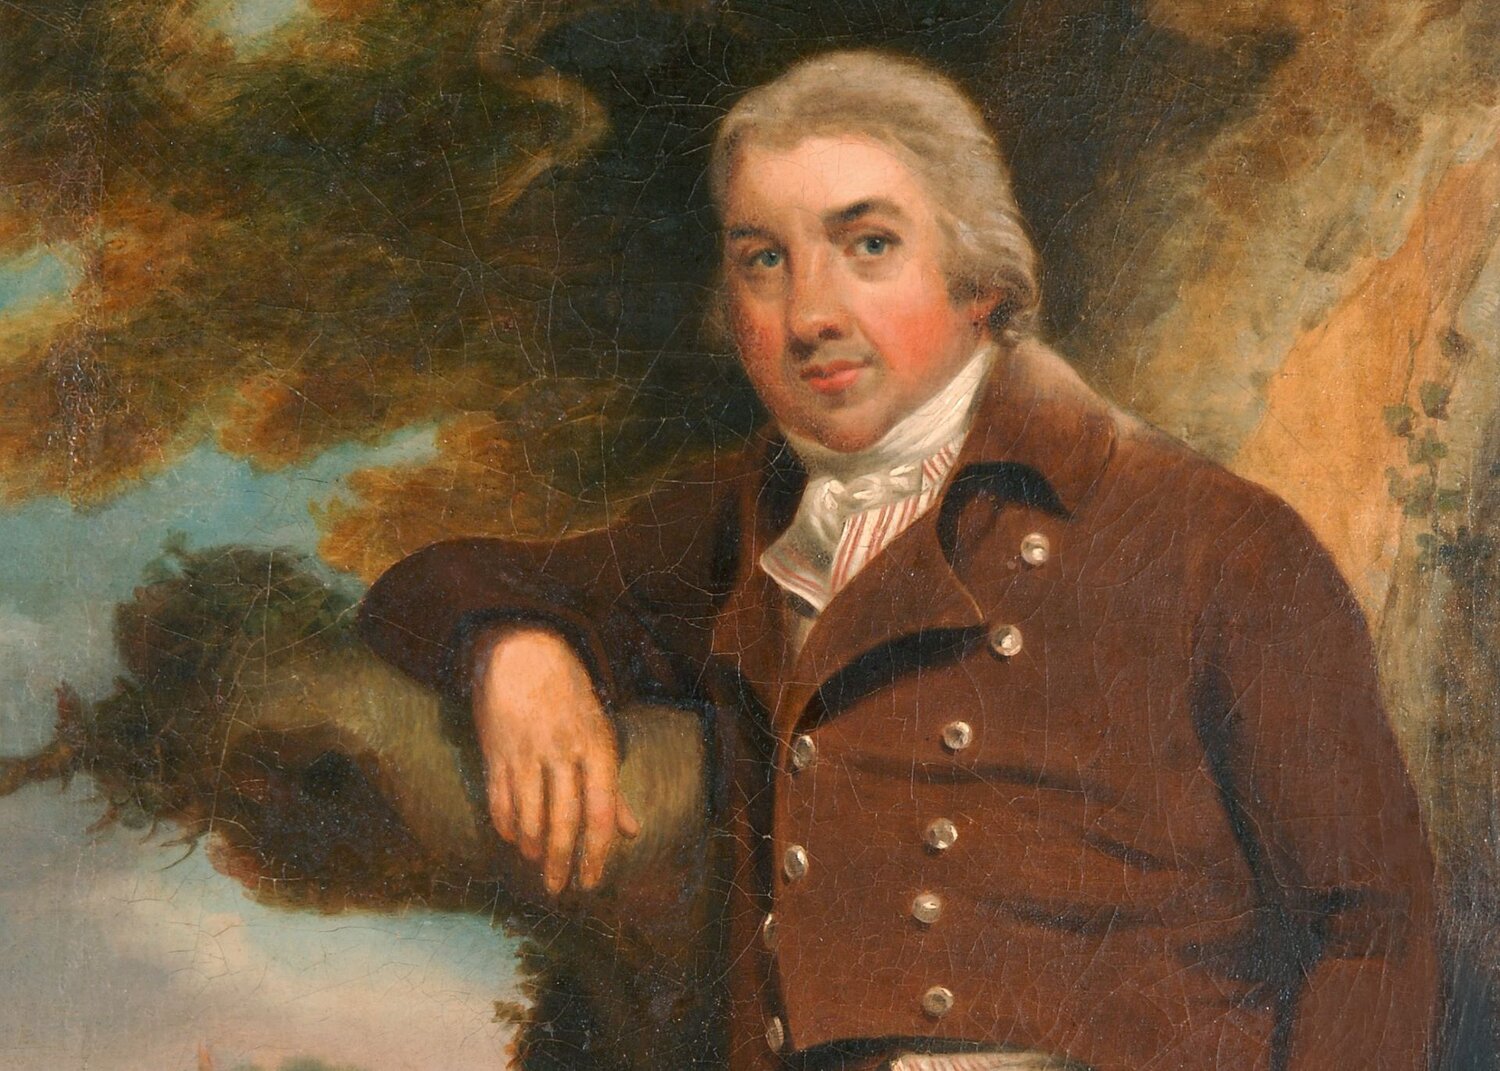 Biography of Edward Jenner - British doctor and scientist